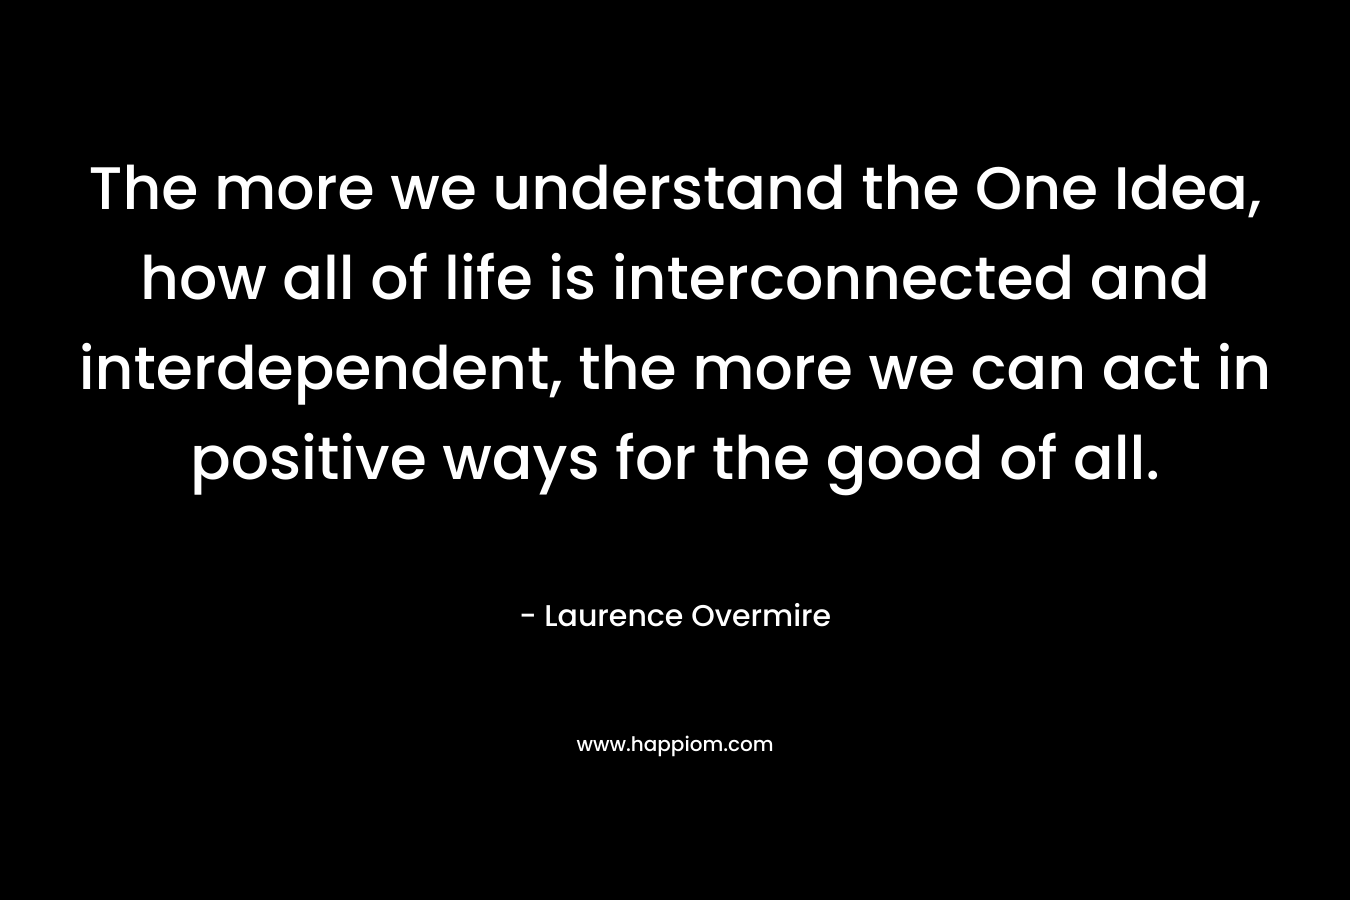 The more we understand the One Idea, how all of life is interconnected and interdependent, the more we can act in positive ways for the good of all. – Laurence Overmire